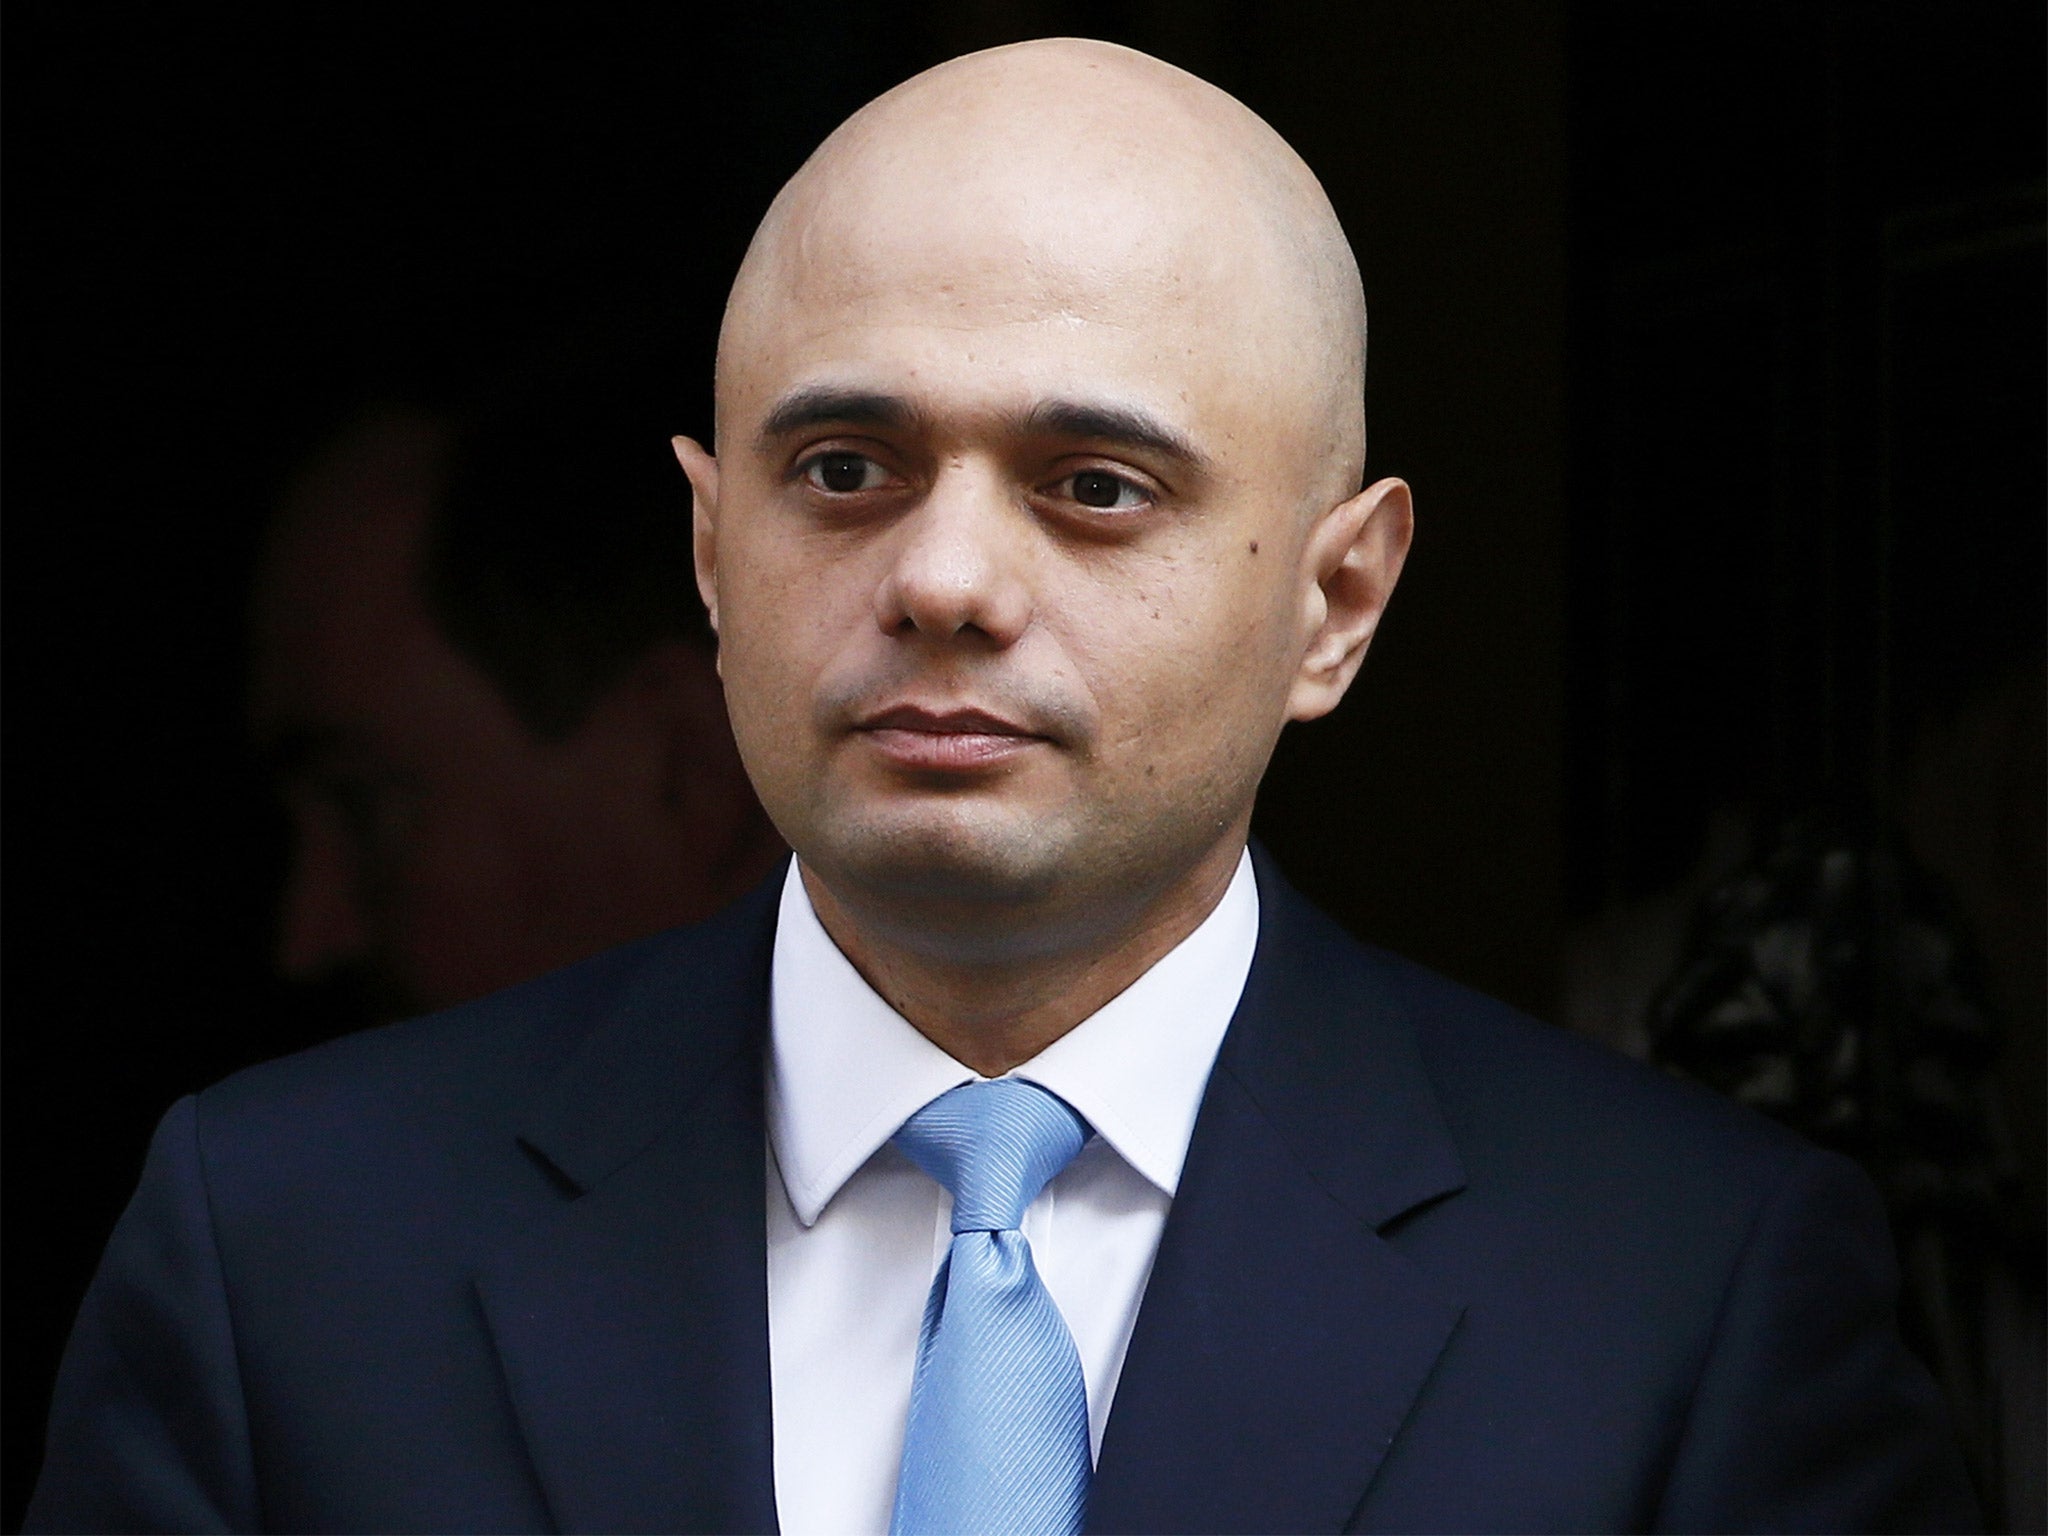 At the end of 2015 Mr Javid claimed “currently costs outweigh benefits” when it comes to membership of the EU